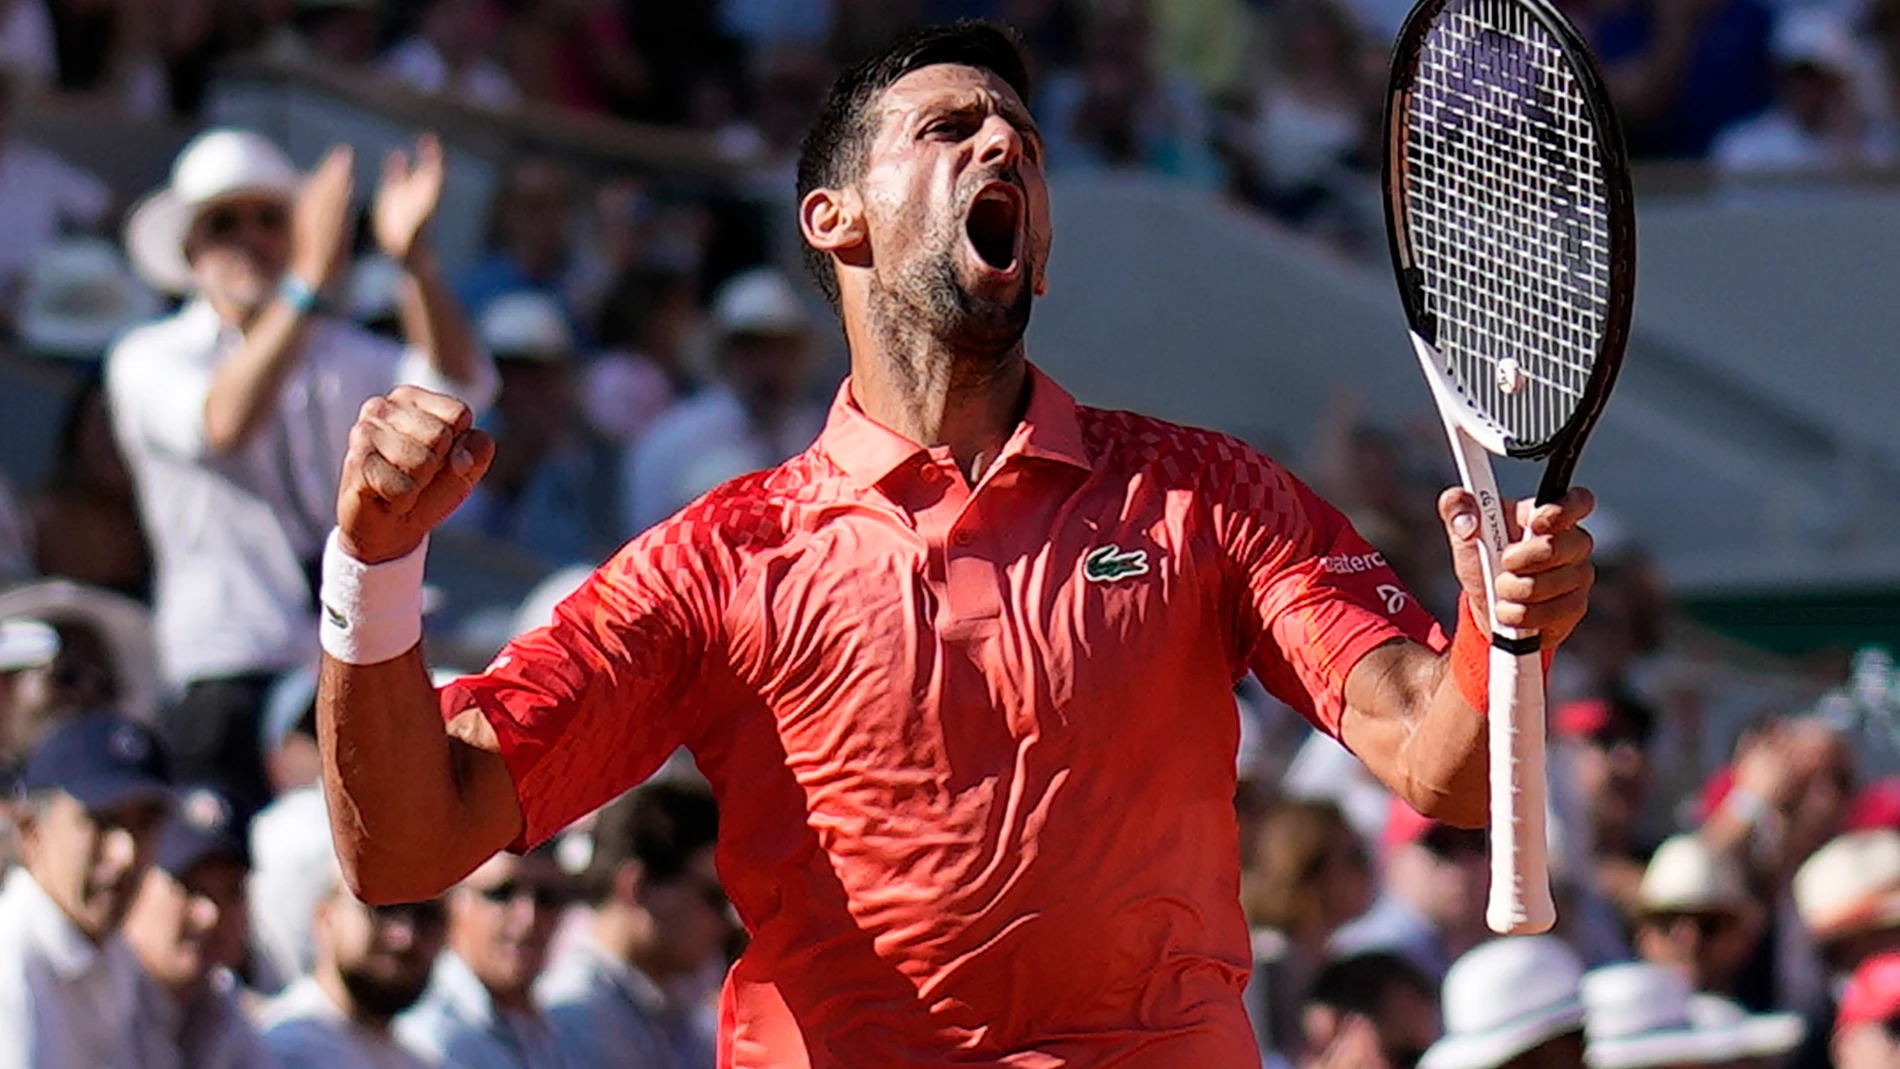 Serbia's Novak Djokovic clenches his fist after scoring a point against Spain's Alejandro Davidovich Fokina during their third round match of the French Open tennis tournament at the Roland Garros stadium in Paris, Friday, June 2, 2023. (AP Photo/Christophe Ena)